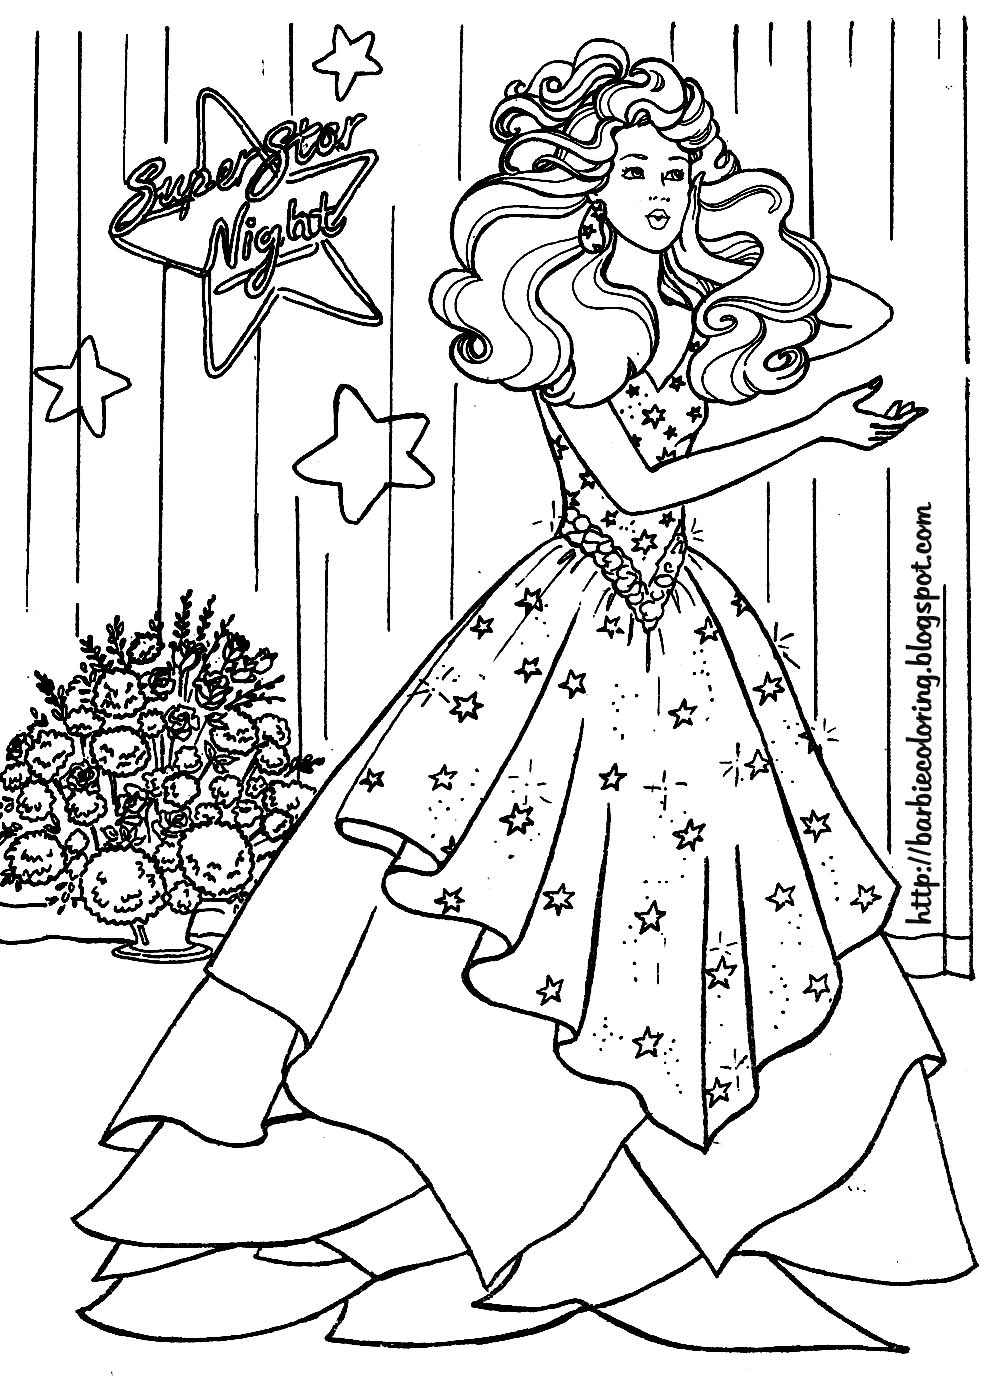  Barbie at Theater Coloring Pages | Barbie Coloring Pictures